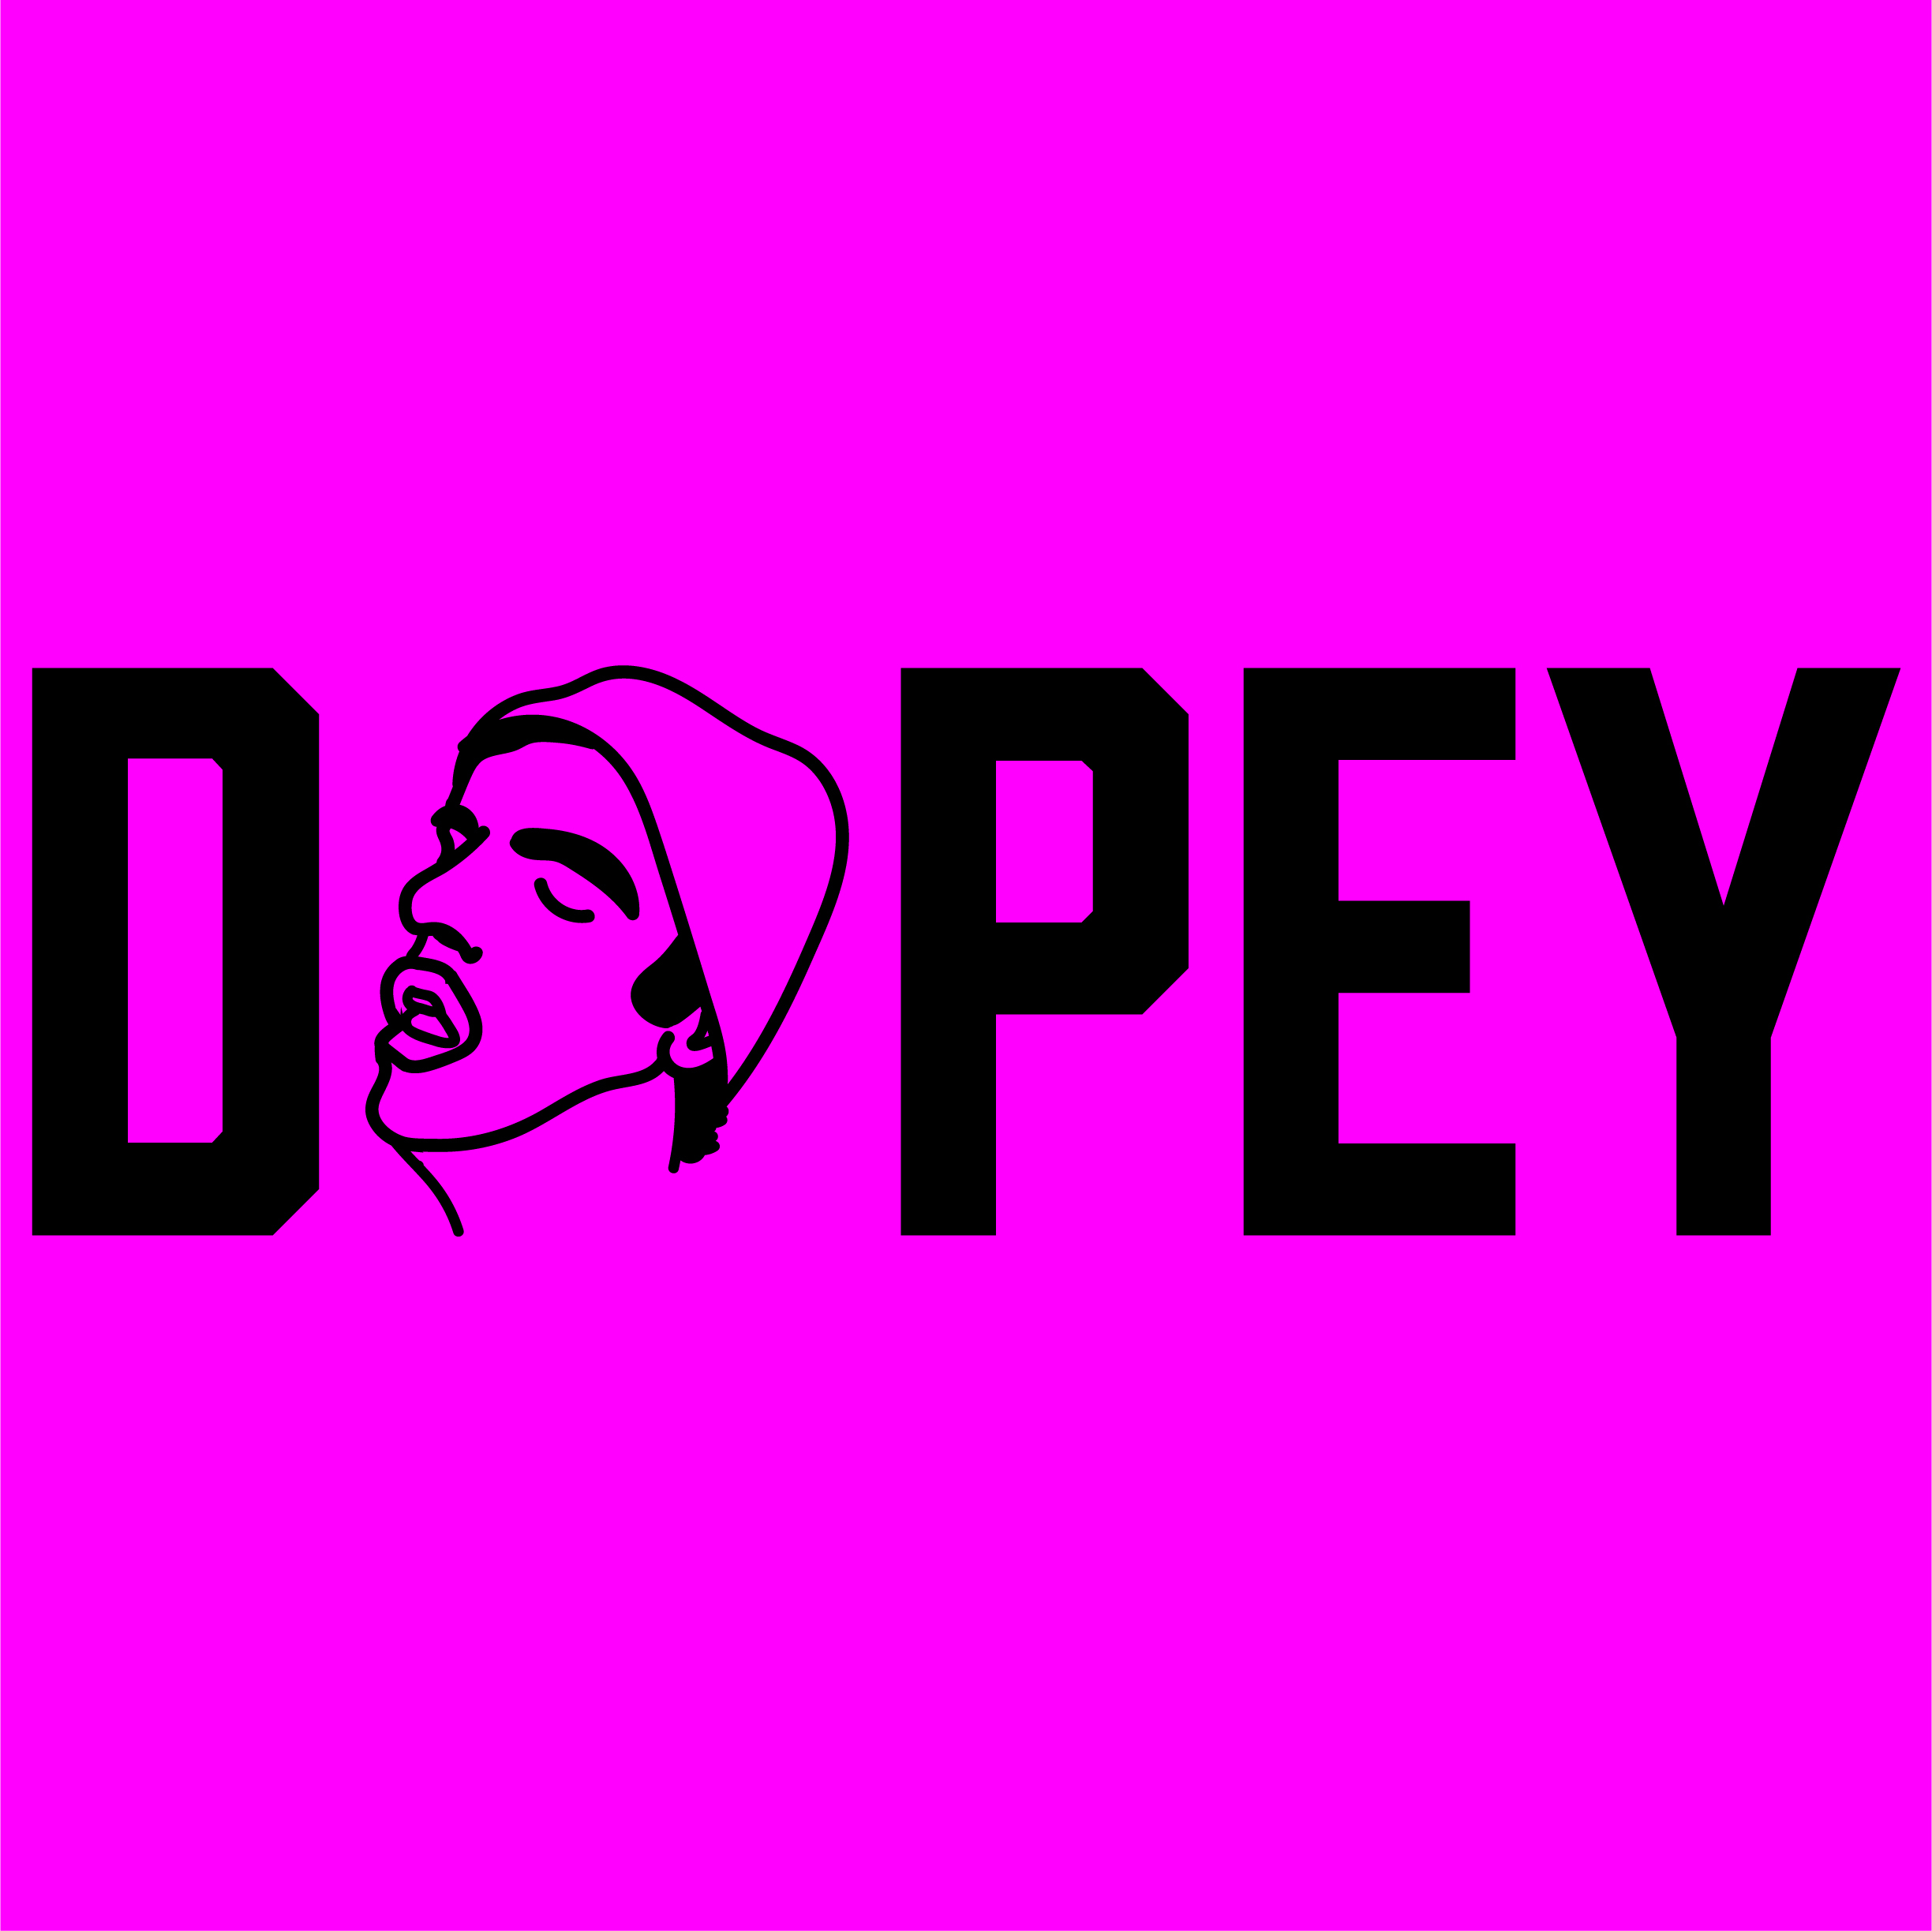 Dopey125: Dave's Pilot, Fired on First Day of Work, Maegan and Bobby from Boston, Prison, Artie Lange Interactions, The Addictionary